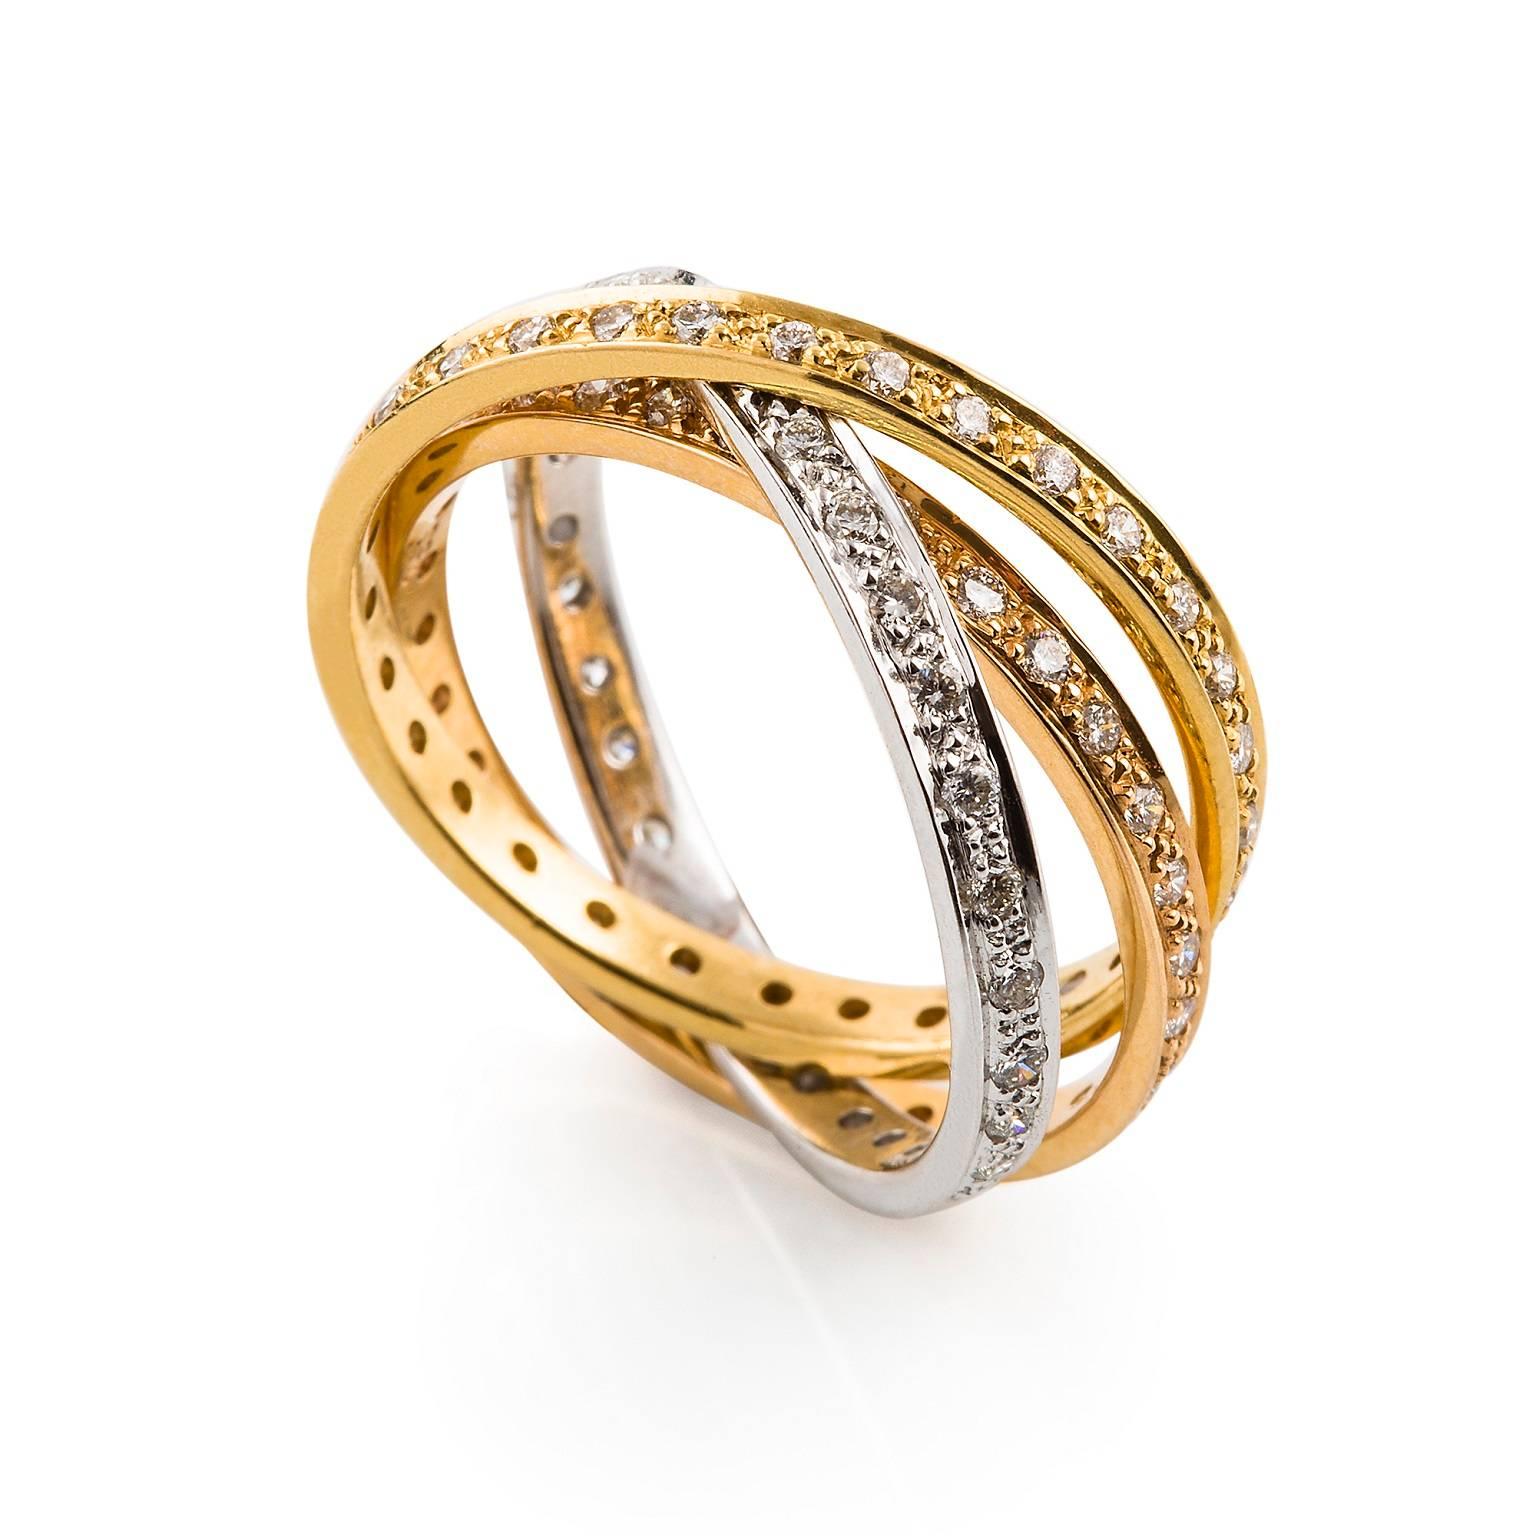 Russo  Diamante Ring

The multi-gold - a mix of 18 carat white, yellow and rose golds, makes this Russian wedding ring a standout. Consisting of three interlocking bands, also known as a trinity ring, enhances the sparkle of the diamond with